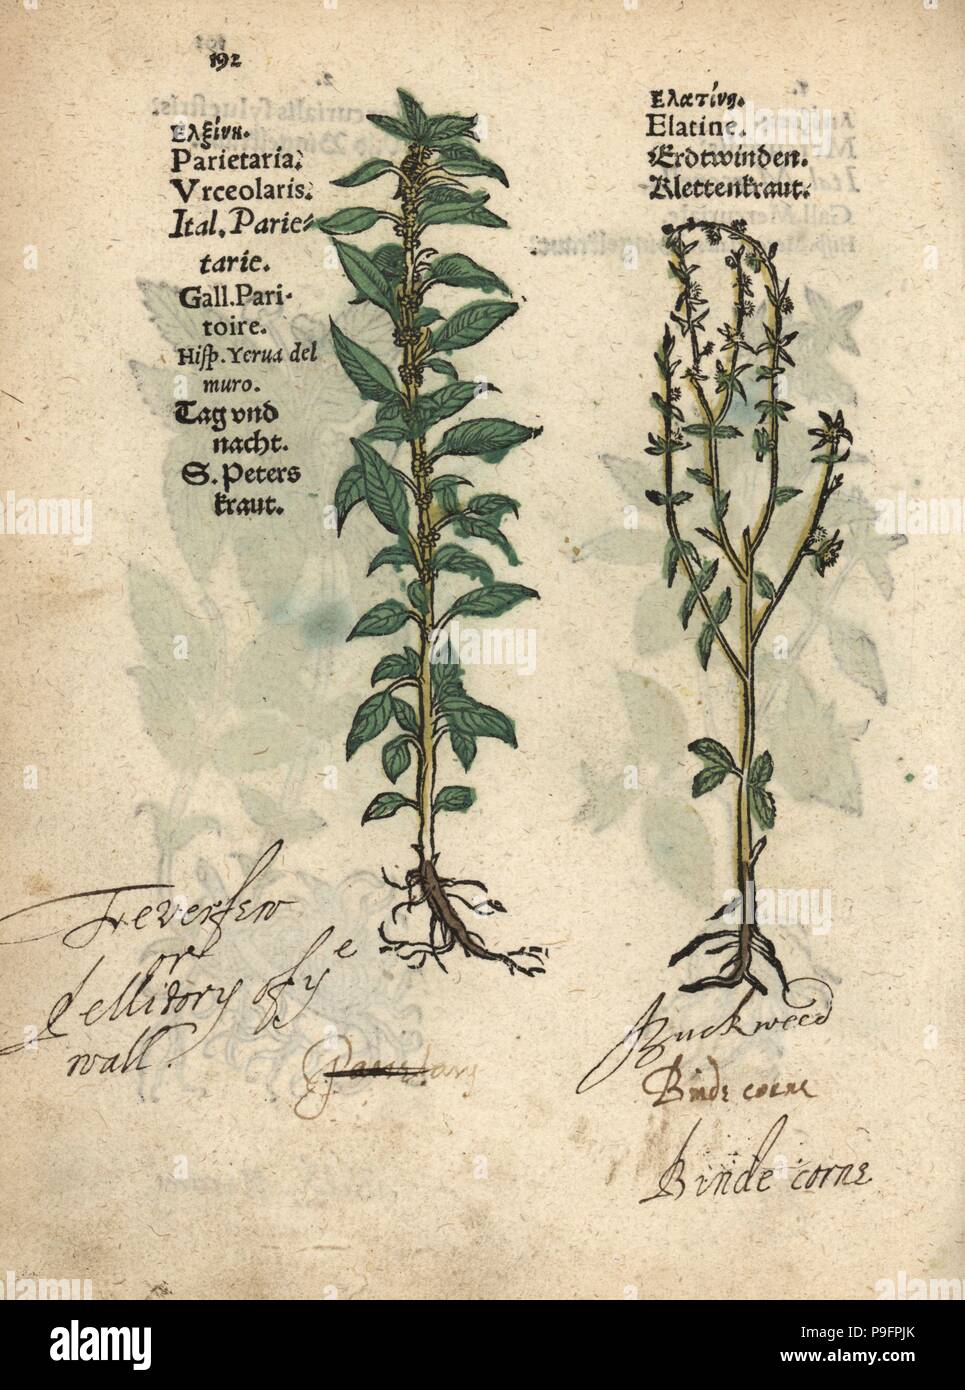 Pellitory of the wall, Parietaria officinalis, and unknown plant, Elatine. Handcoloured woodblock engraving of a botanical illustration from Adam Lonicer's Krauterbuch, or Herbal, Frankfurt, 1557. This from a 17th century pirate edition or atlas of illustrations only, with captions in Latin, Greek, French, Italian, German, and in English manuscript. Stock Photo